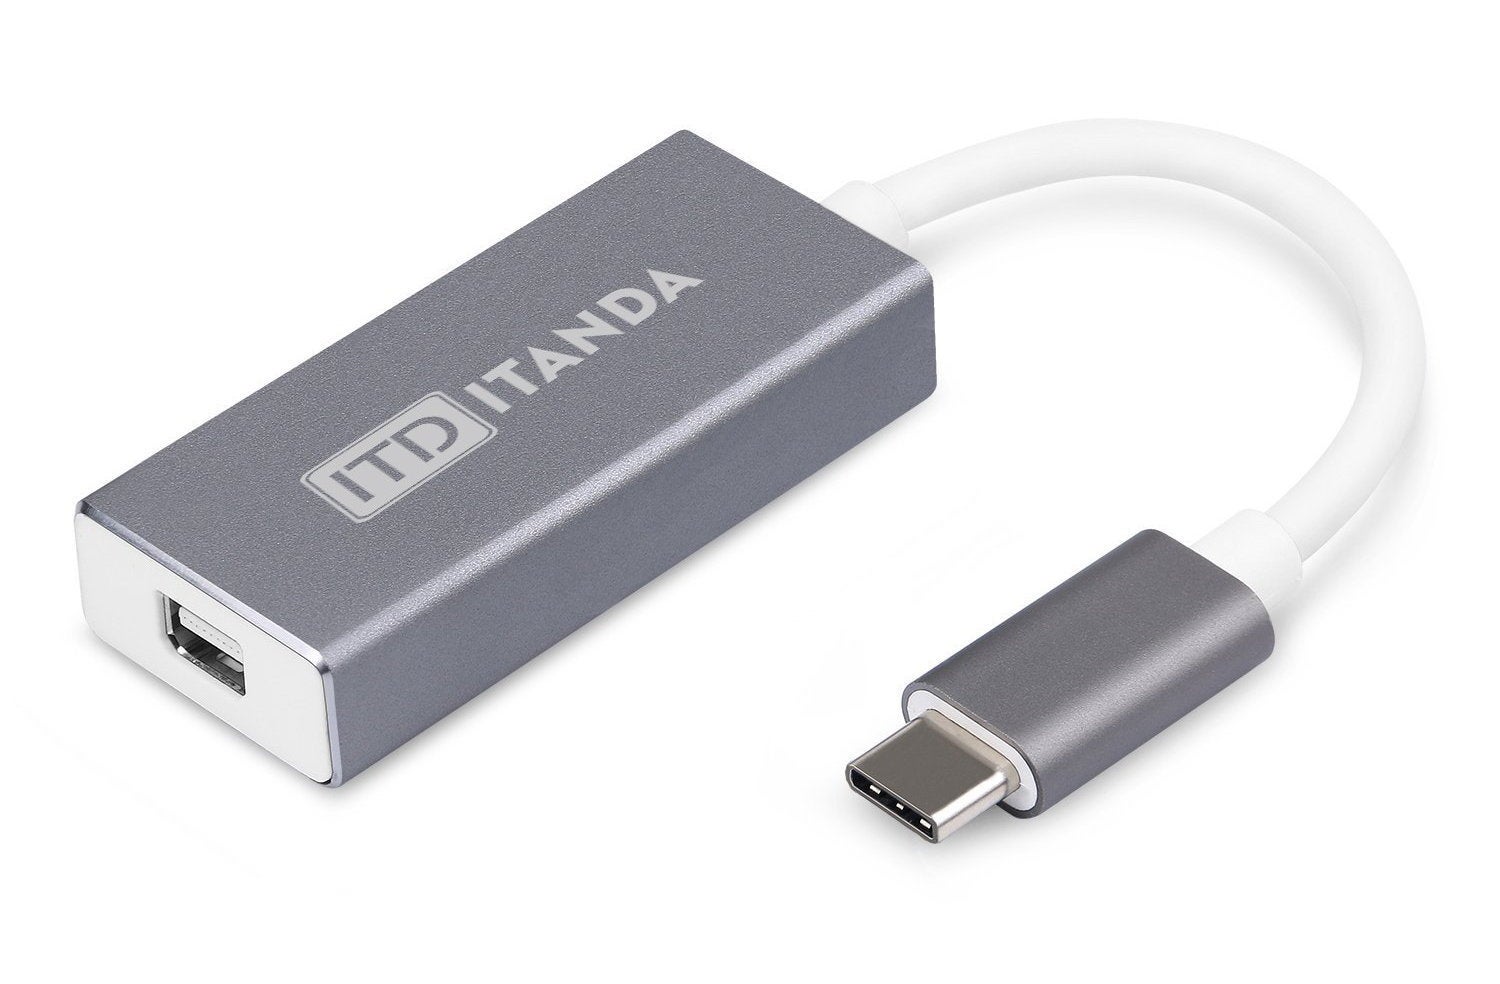 connect mac to pc usb cable